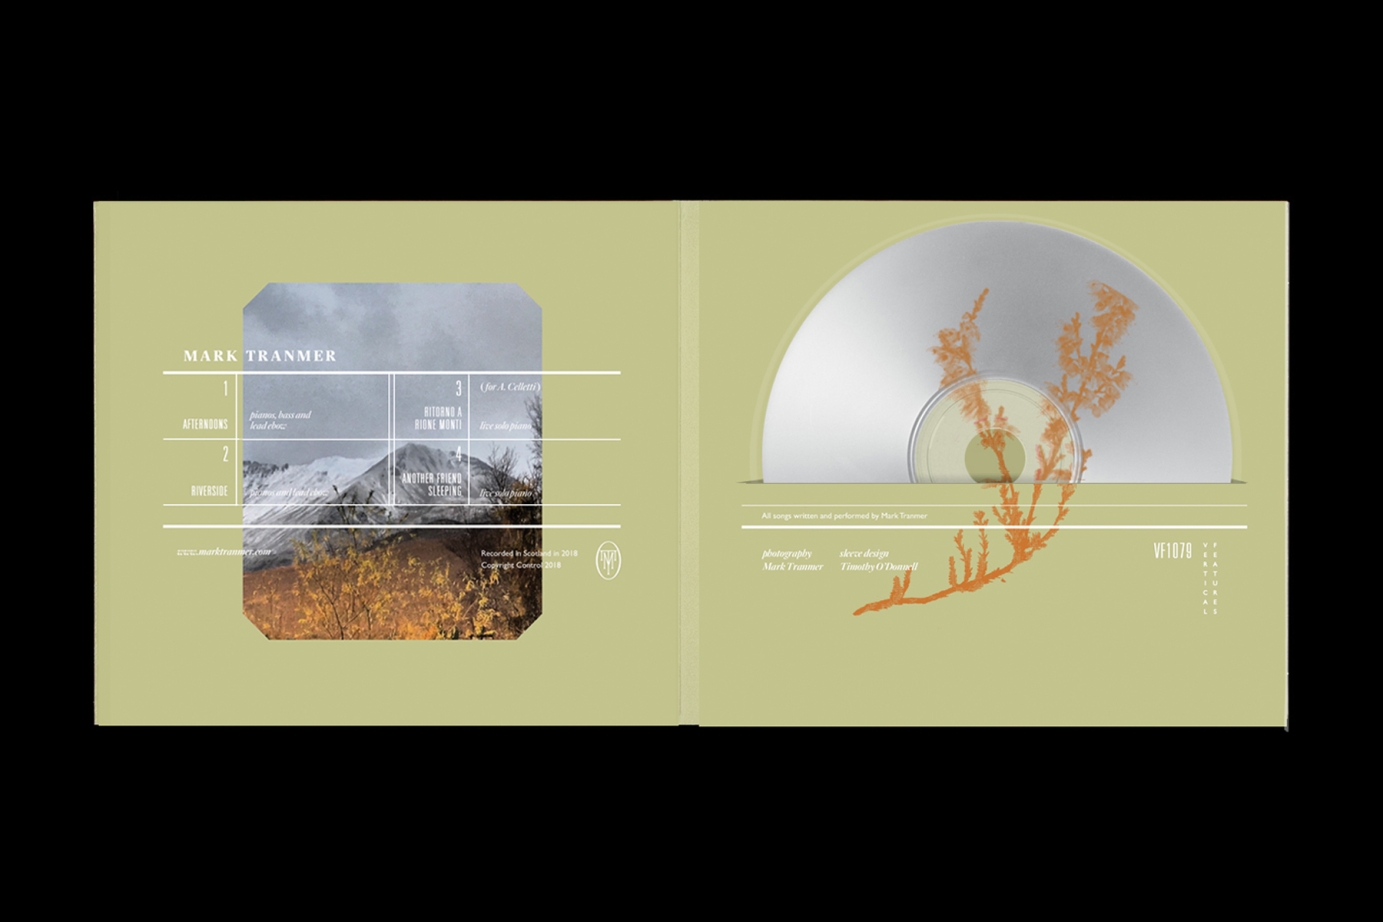 Graphic design for Mark Tranmer by TimothyODonnell